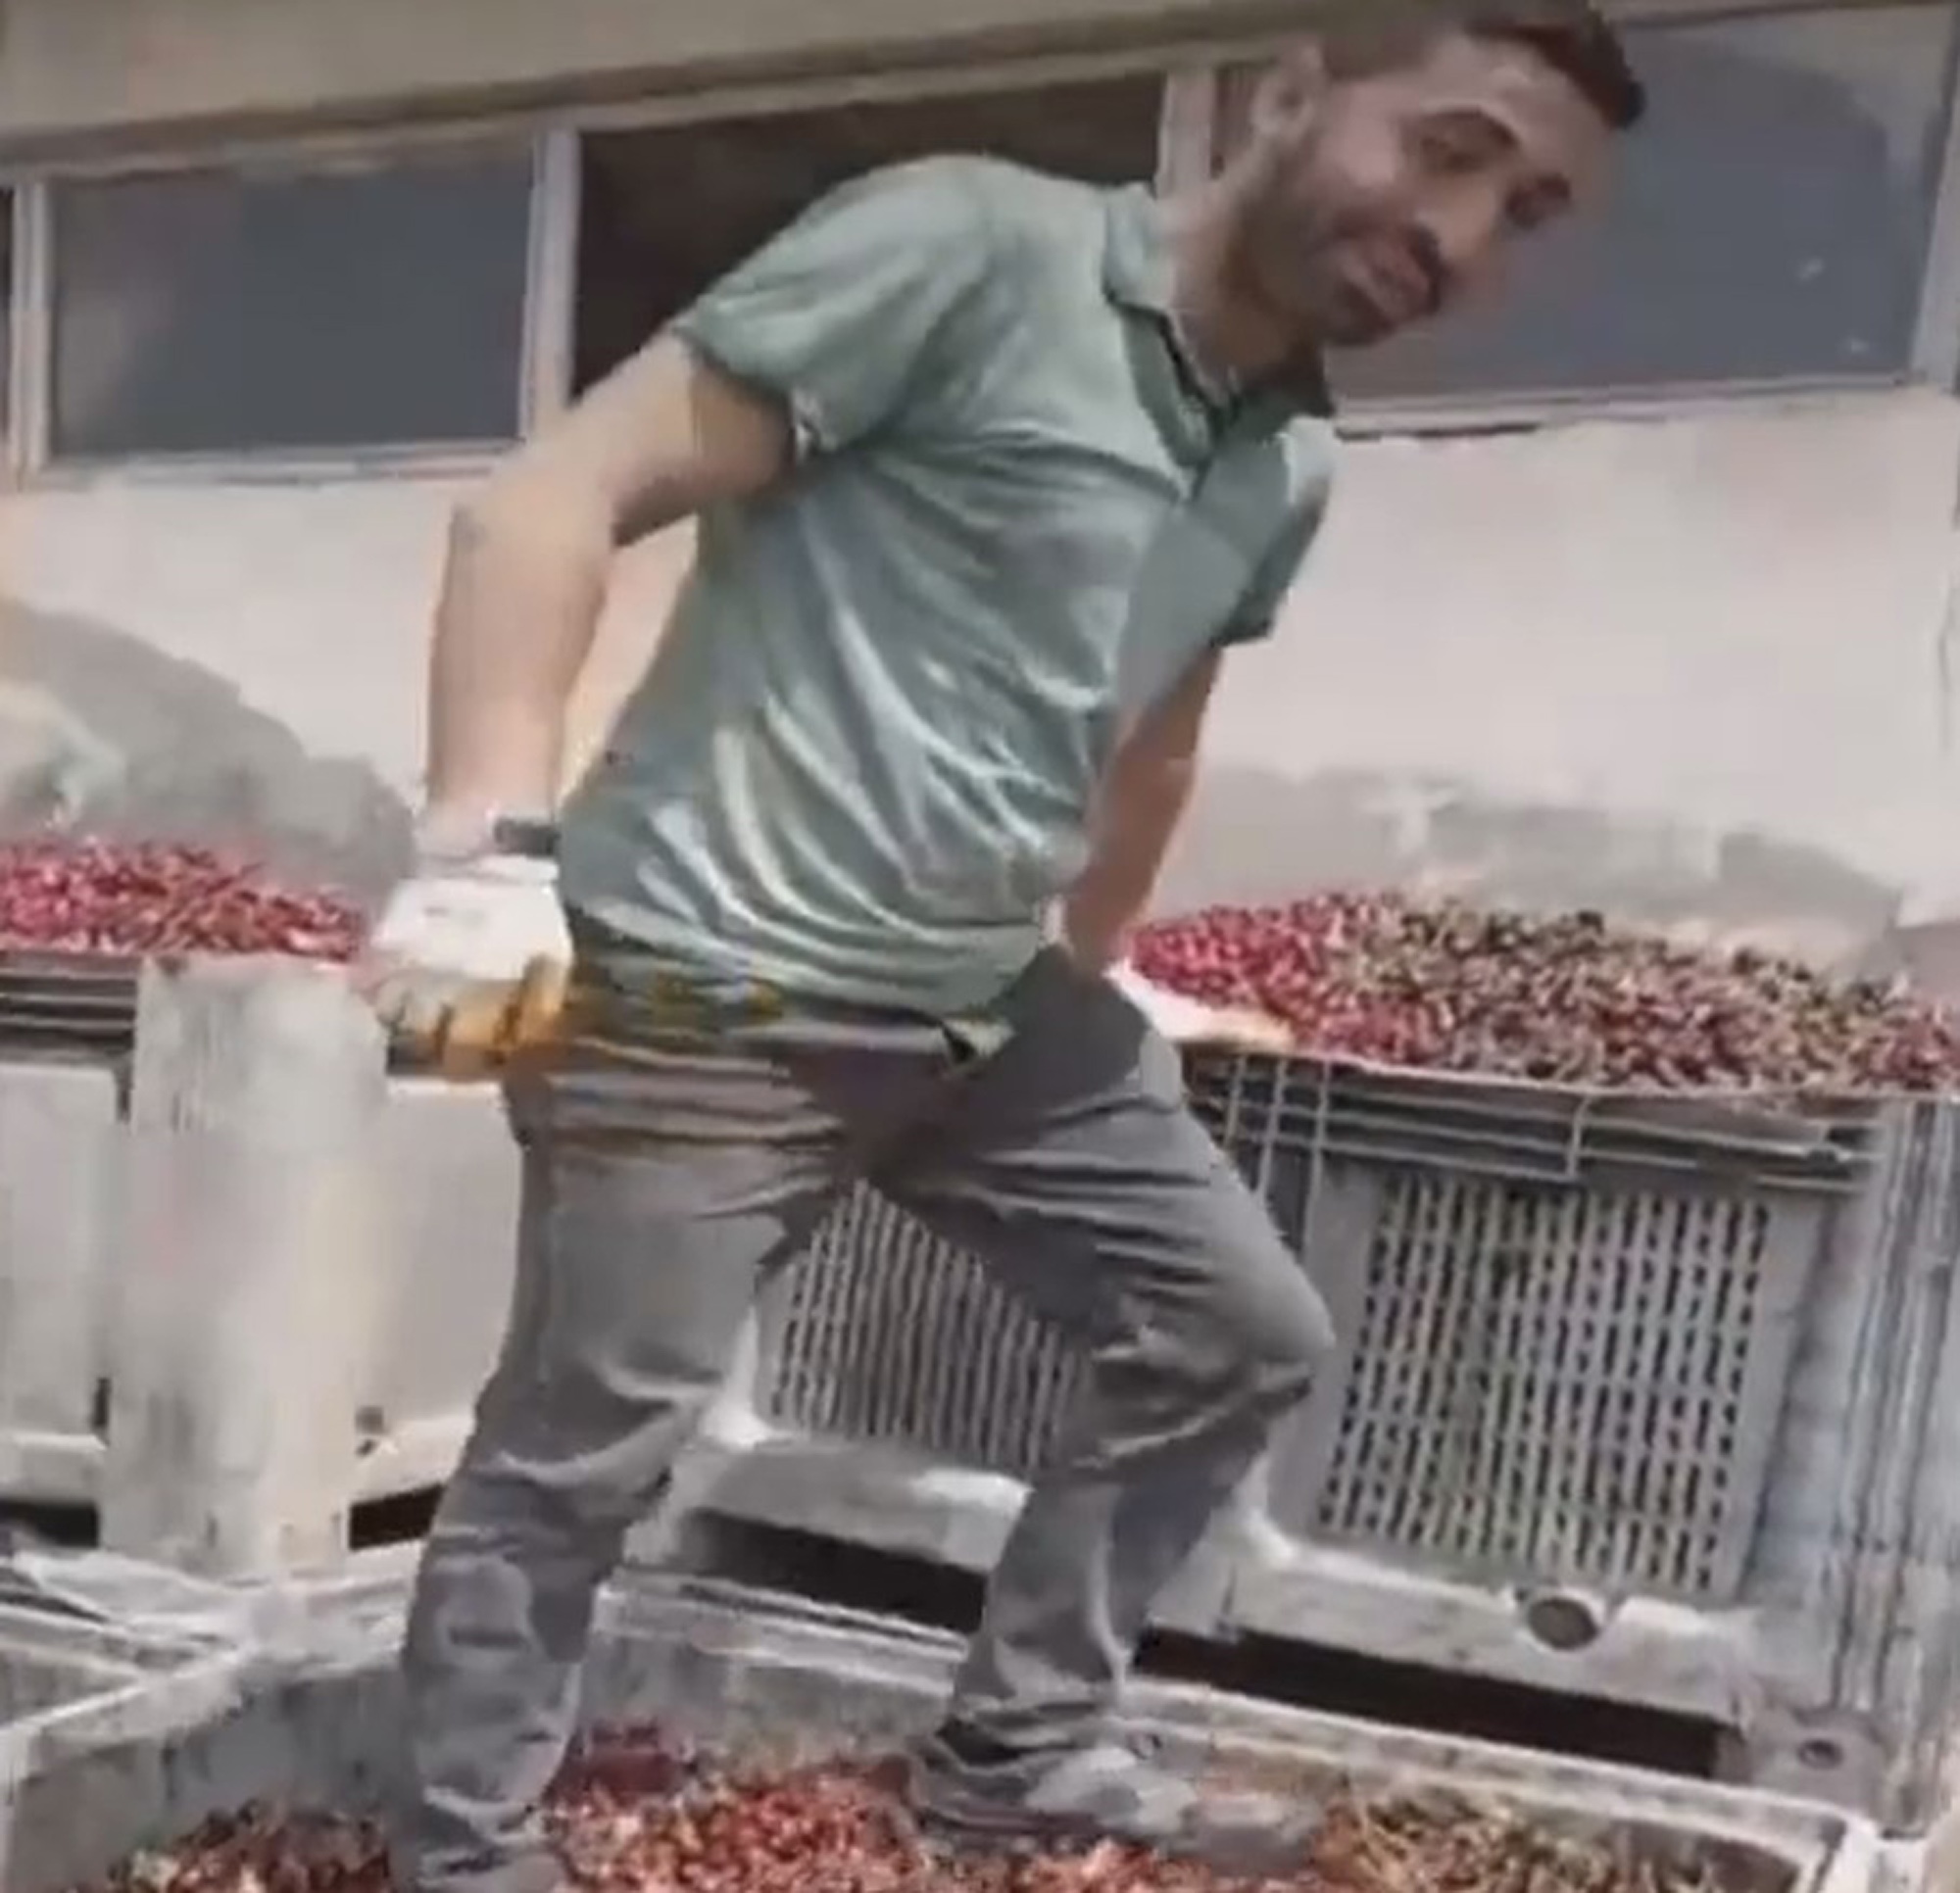 Read more about the article Four People Detained After Footage Of Worker Crushing Cherries To Make Jam And Juice With Boots On